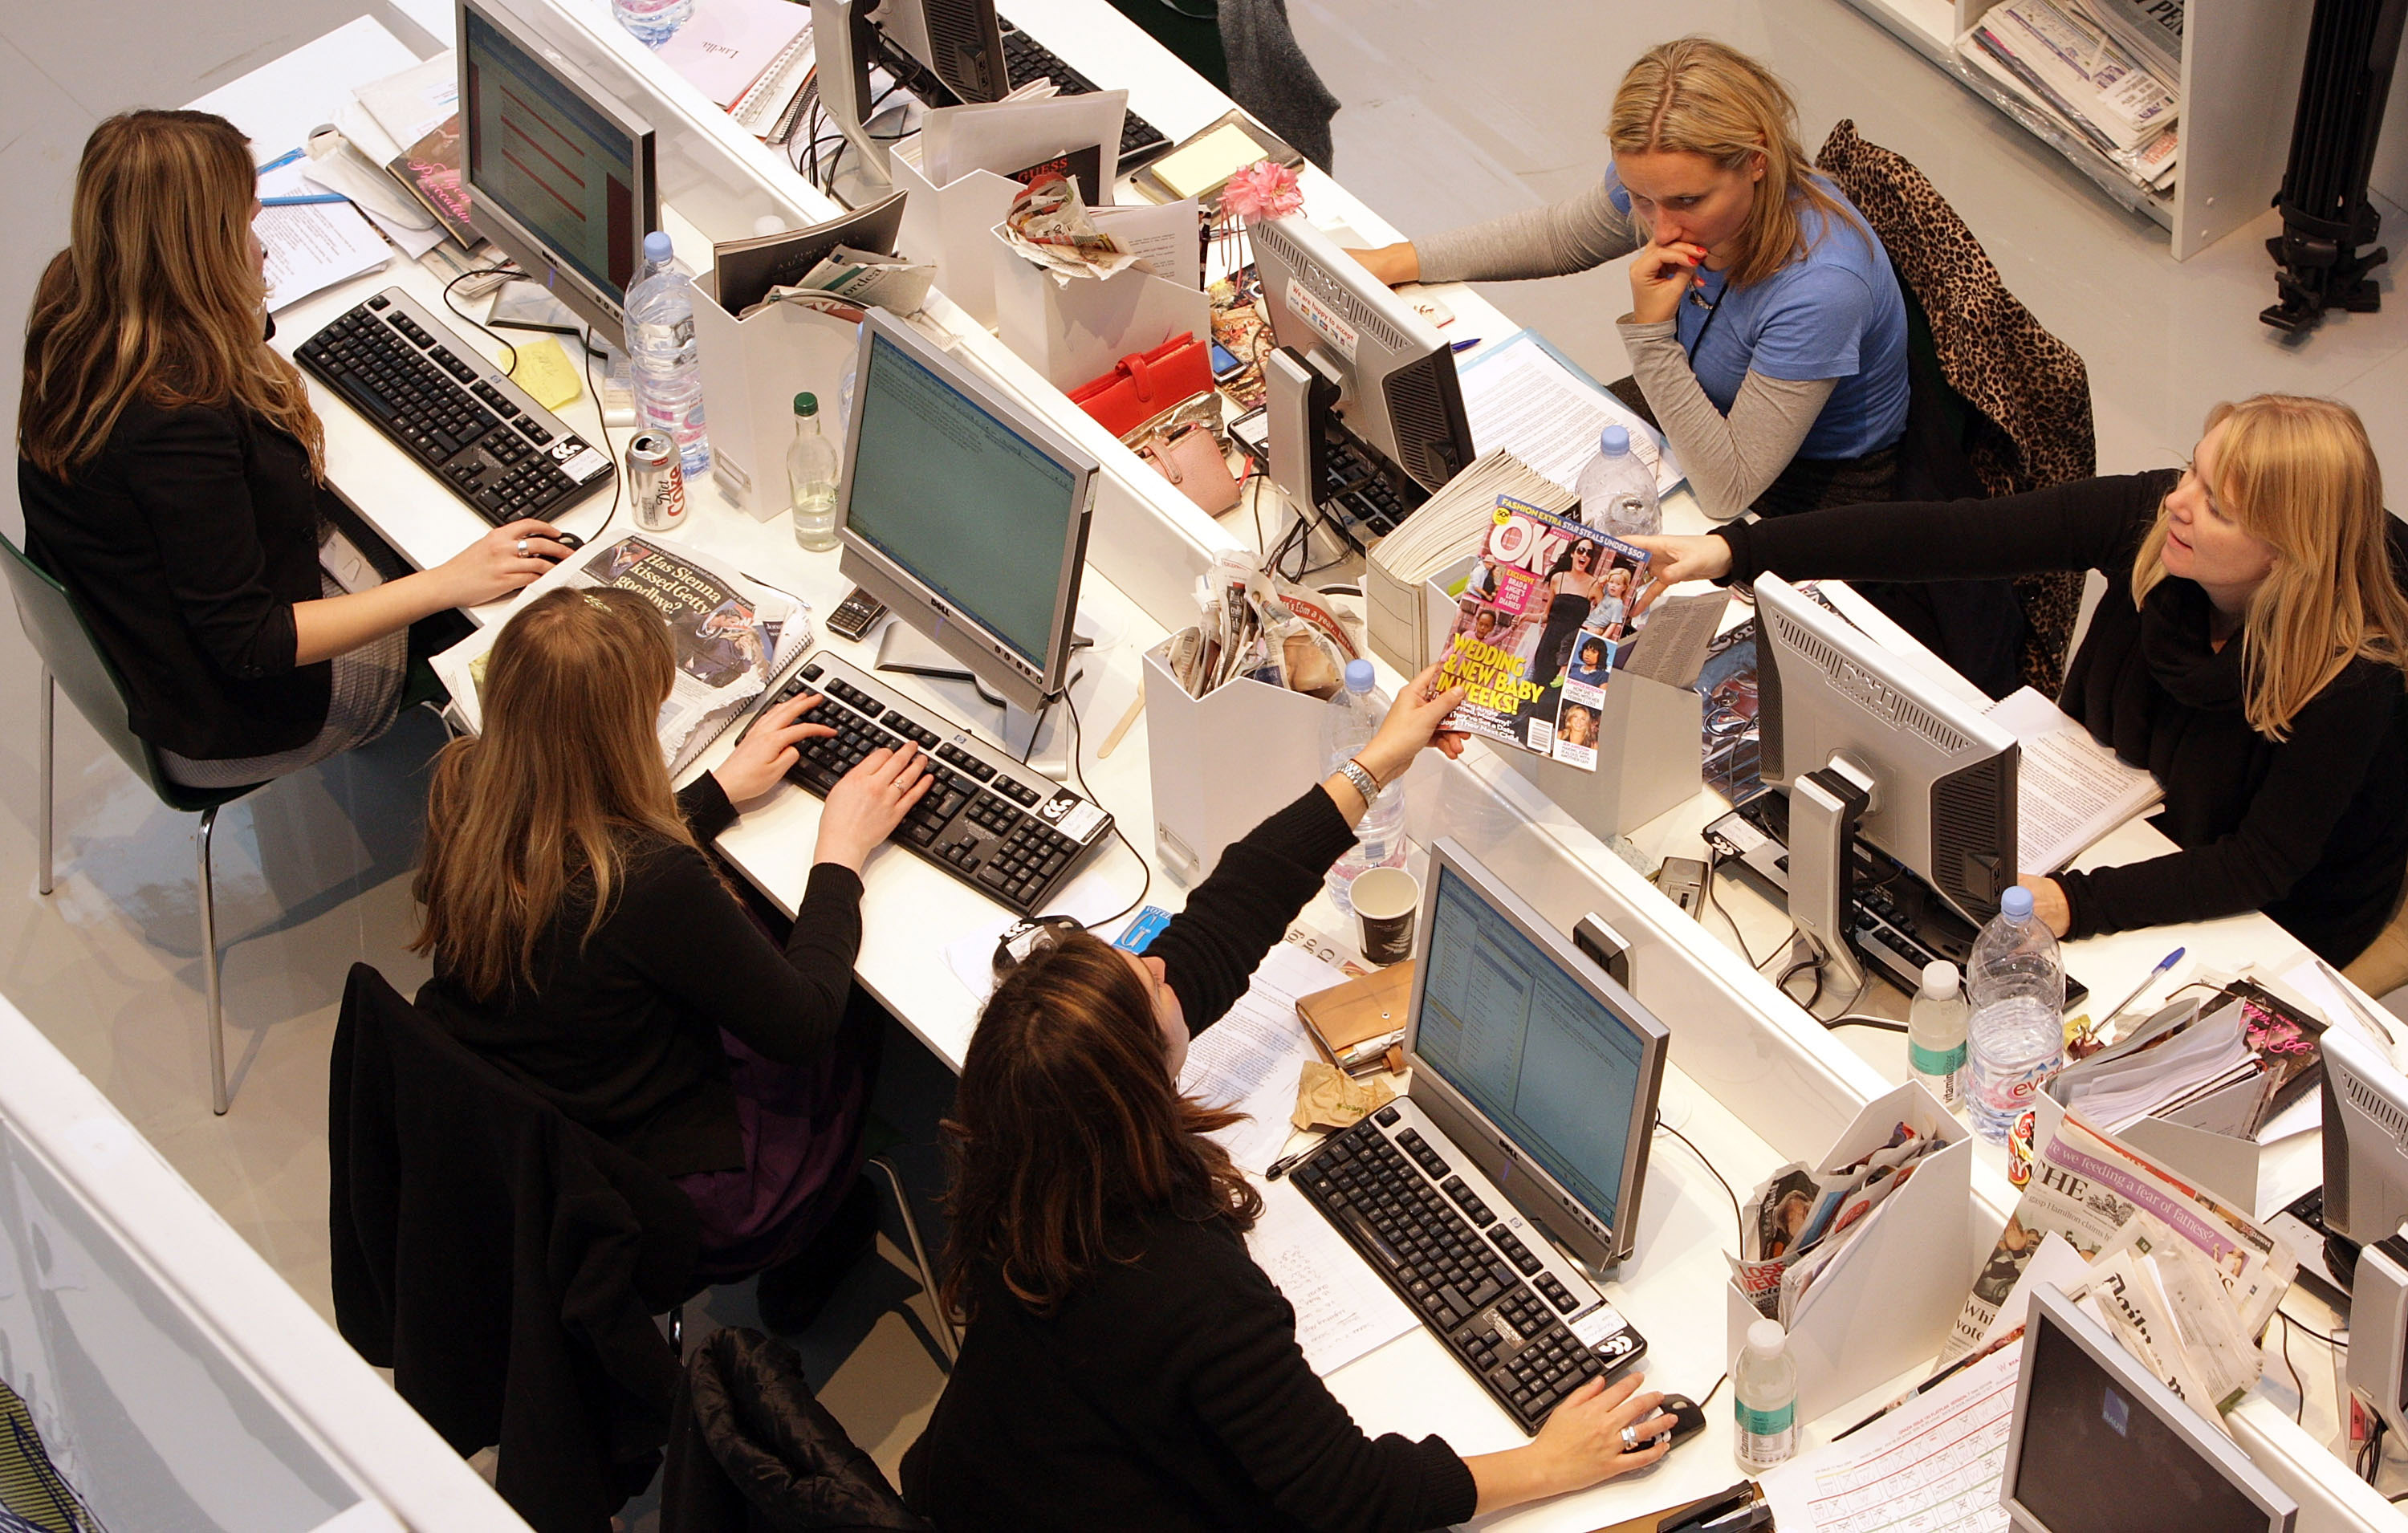 Production staff on the weekly fashion magazine, Grazia edit the magazine in a temporary office inside the Westfield shopping centre on November 3, 2008 in London. (Oli Scarff&mdash;Getty Images)